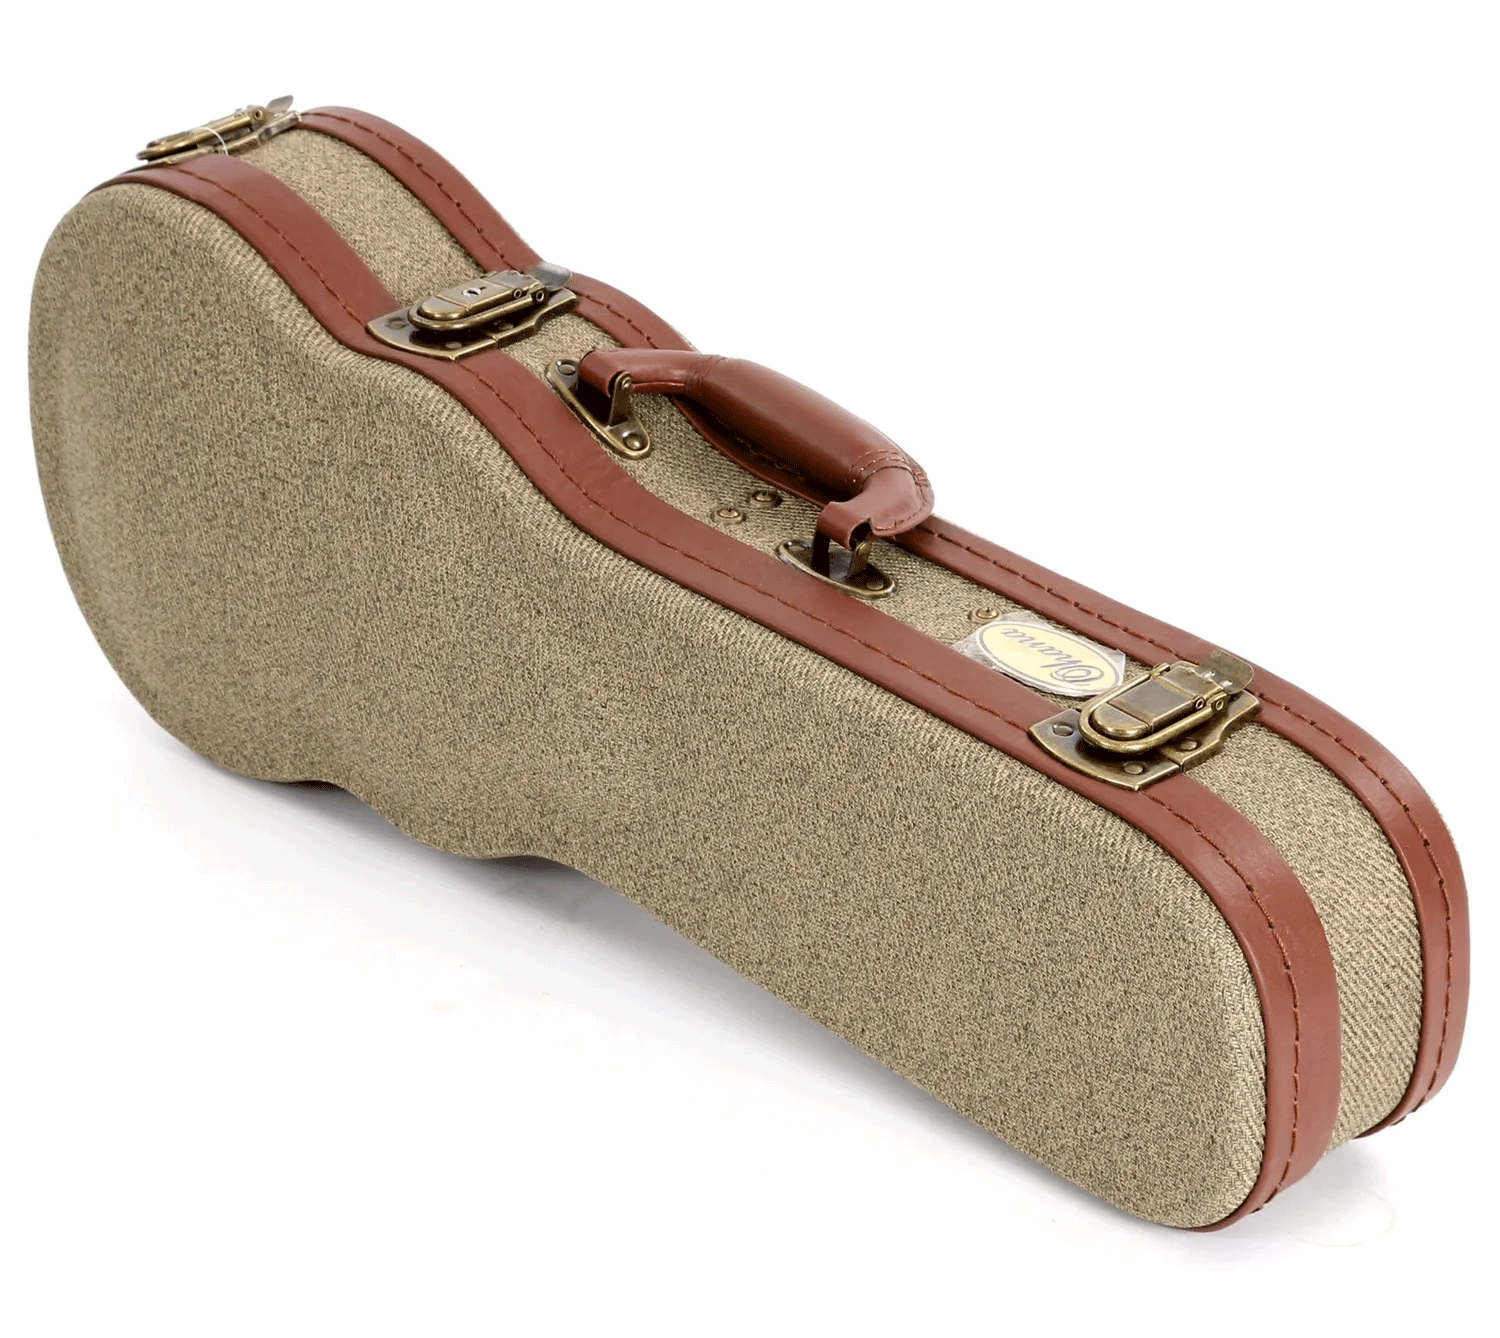 Ohana Hardcase UOT-24 Concert Ukulele Case Durable Olive Twill Fabric Arched Top Design for Extra Instrument Protection Brown Tolex Trim with Sewn Stitching and Matching Handle Antique Bronze Drawbolt Case Latches Antique Bronze Side and Bottom Stops for Extra Stability & Protection Padded Plush Interior Velvet in Wine Color Interior Heel Rest with Storage Compartment Ukulele Trading Co Australia